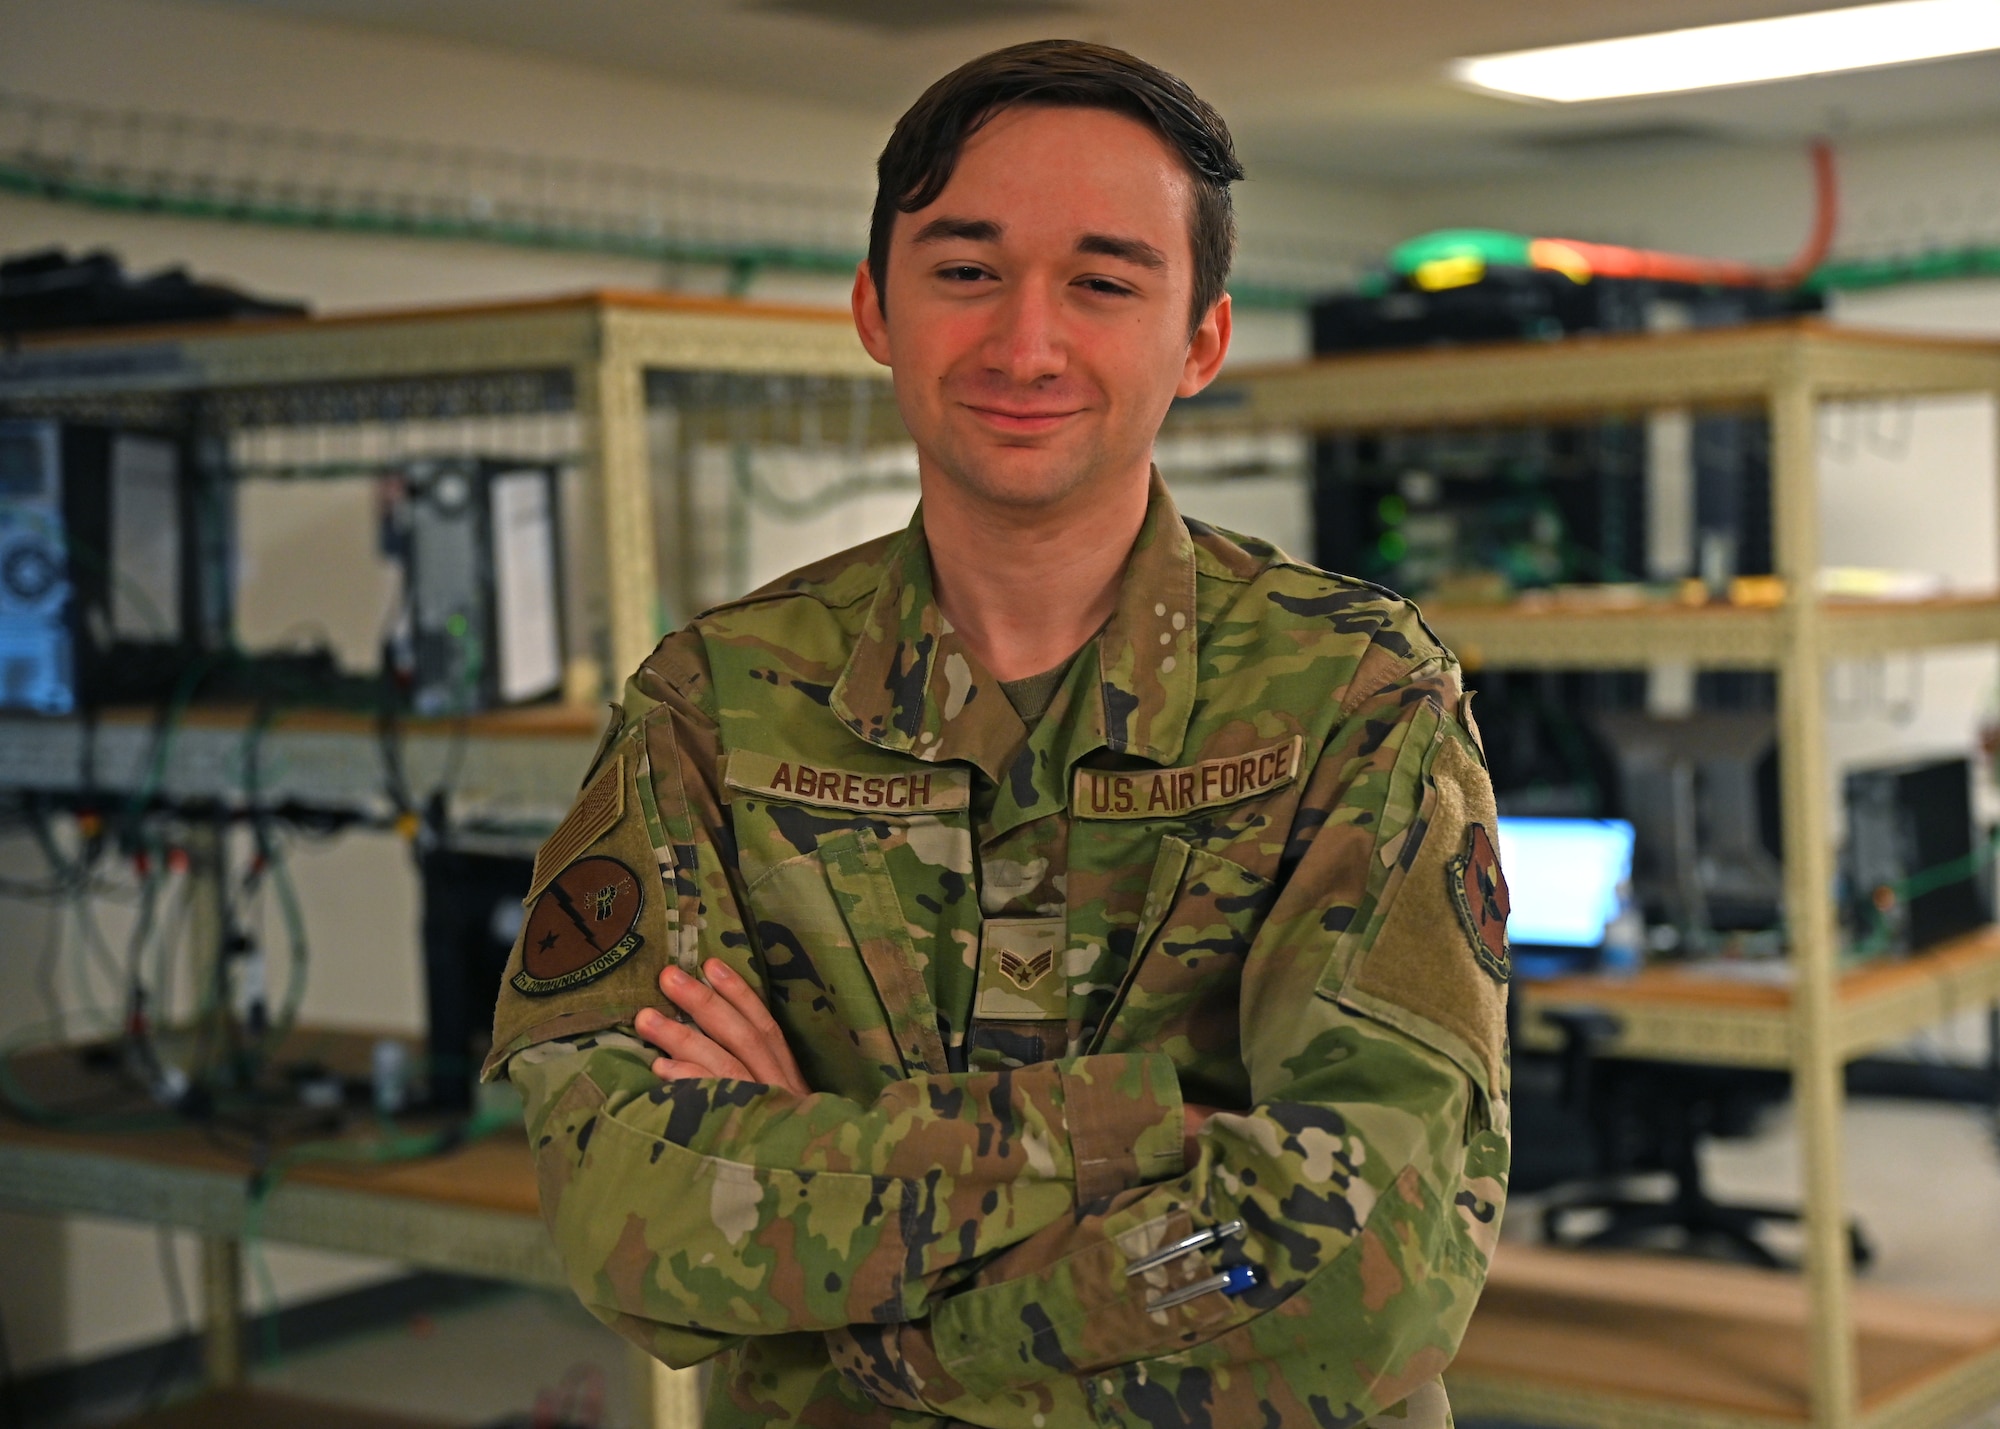 U.S. Air Force Senior Airman Justin Abresch, 17th Communications Squadron client systems technician, poses for a portrait in the 17th CS reimaging lab, Dec. 9, 2021. Abresch was recognized for his efforts in restoring mobile phone support and working with his squadron during the intel course rewrite. (U.S. Air Force photo by Senior Airman Ethan Sherwood)